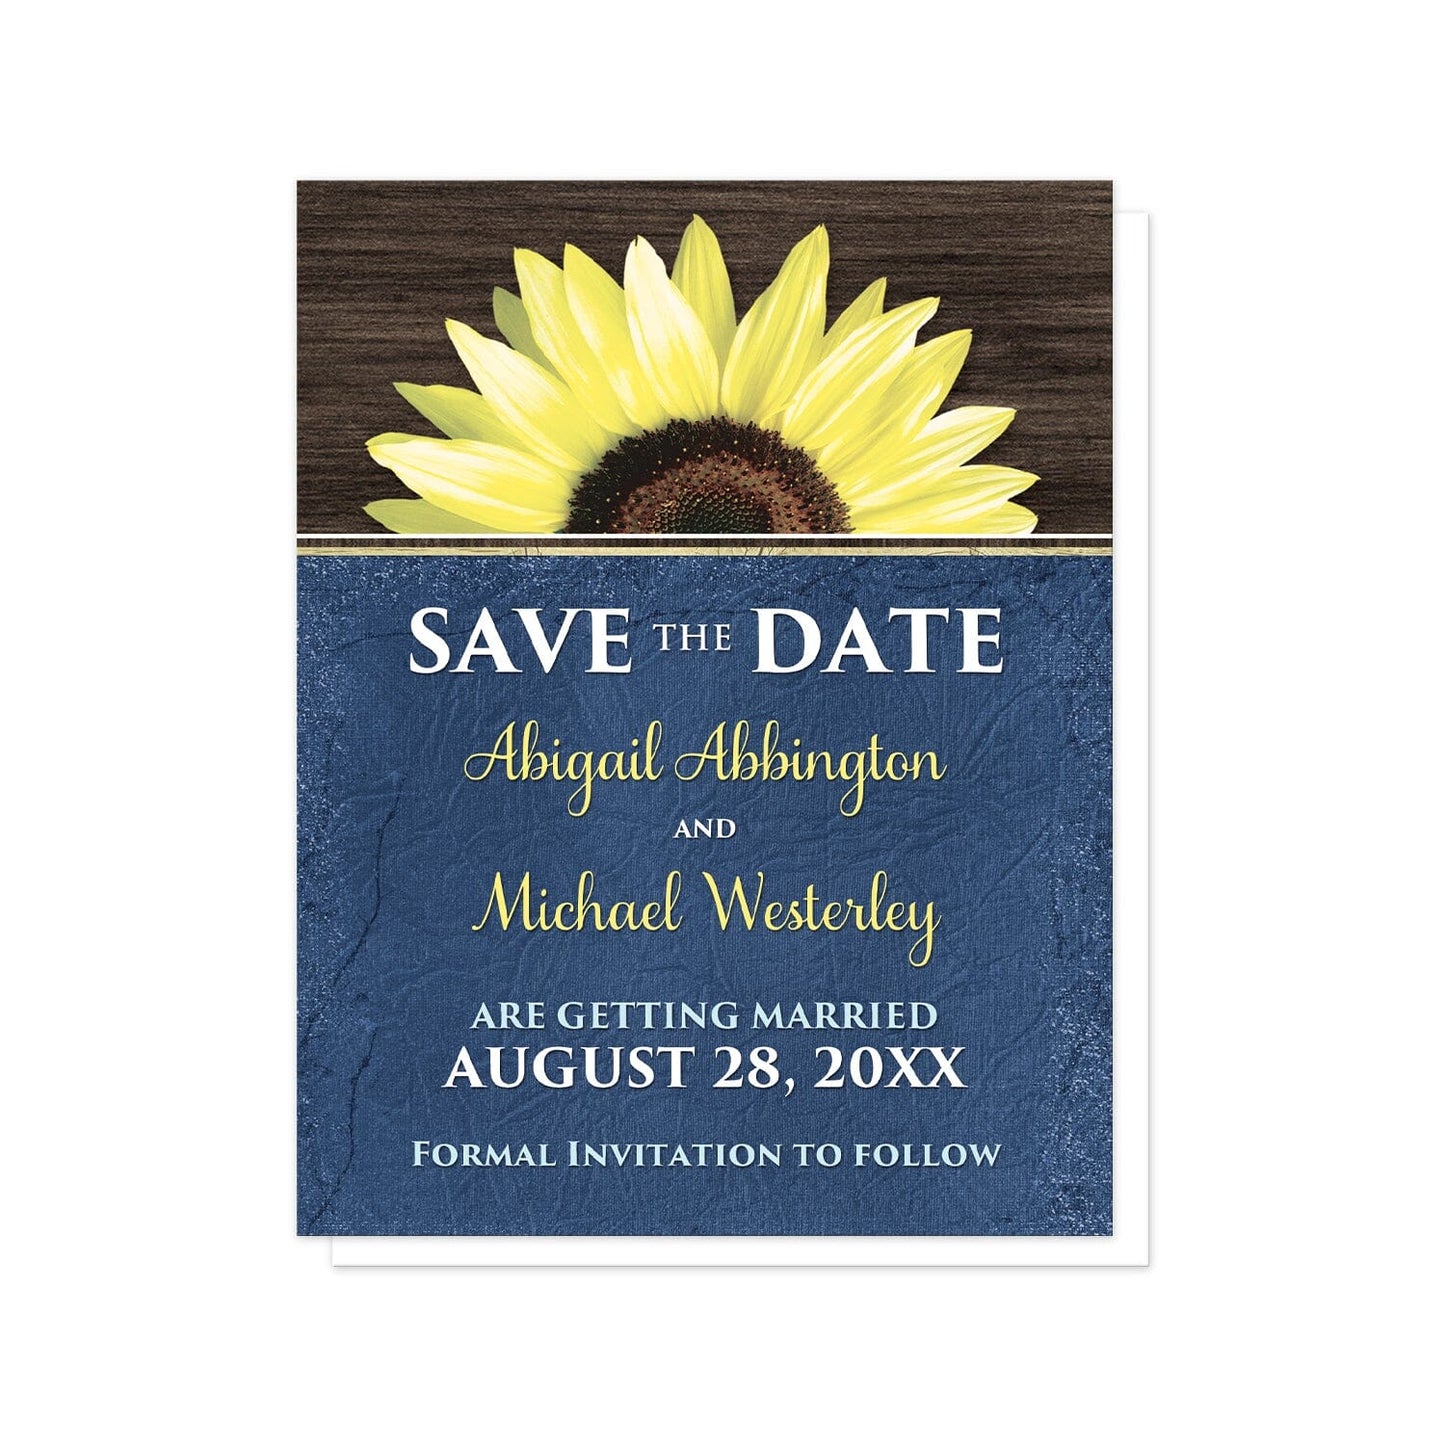 Rustic Sunflower with Blue Save the Date Cards at Artistically Invited. Country-inspired rustic sunflower with blue save the date cards featuring a vibrant bright yellow sunflower over a textured dark brown wood design along the top. Your personalized wedding date details are custom printed in yellow and white over a tattered blue cloth illustration below the sunflower.